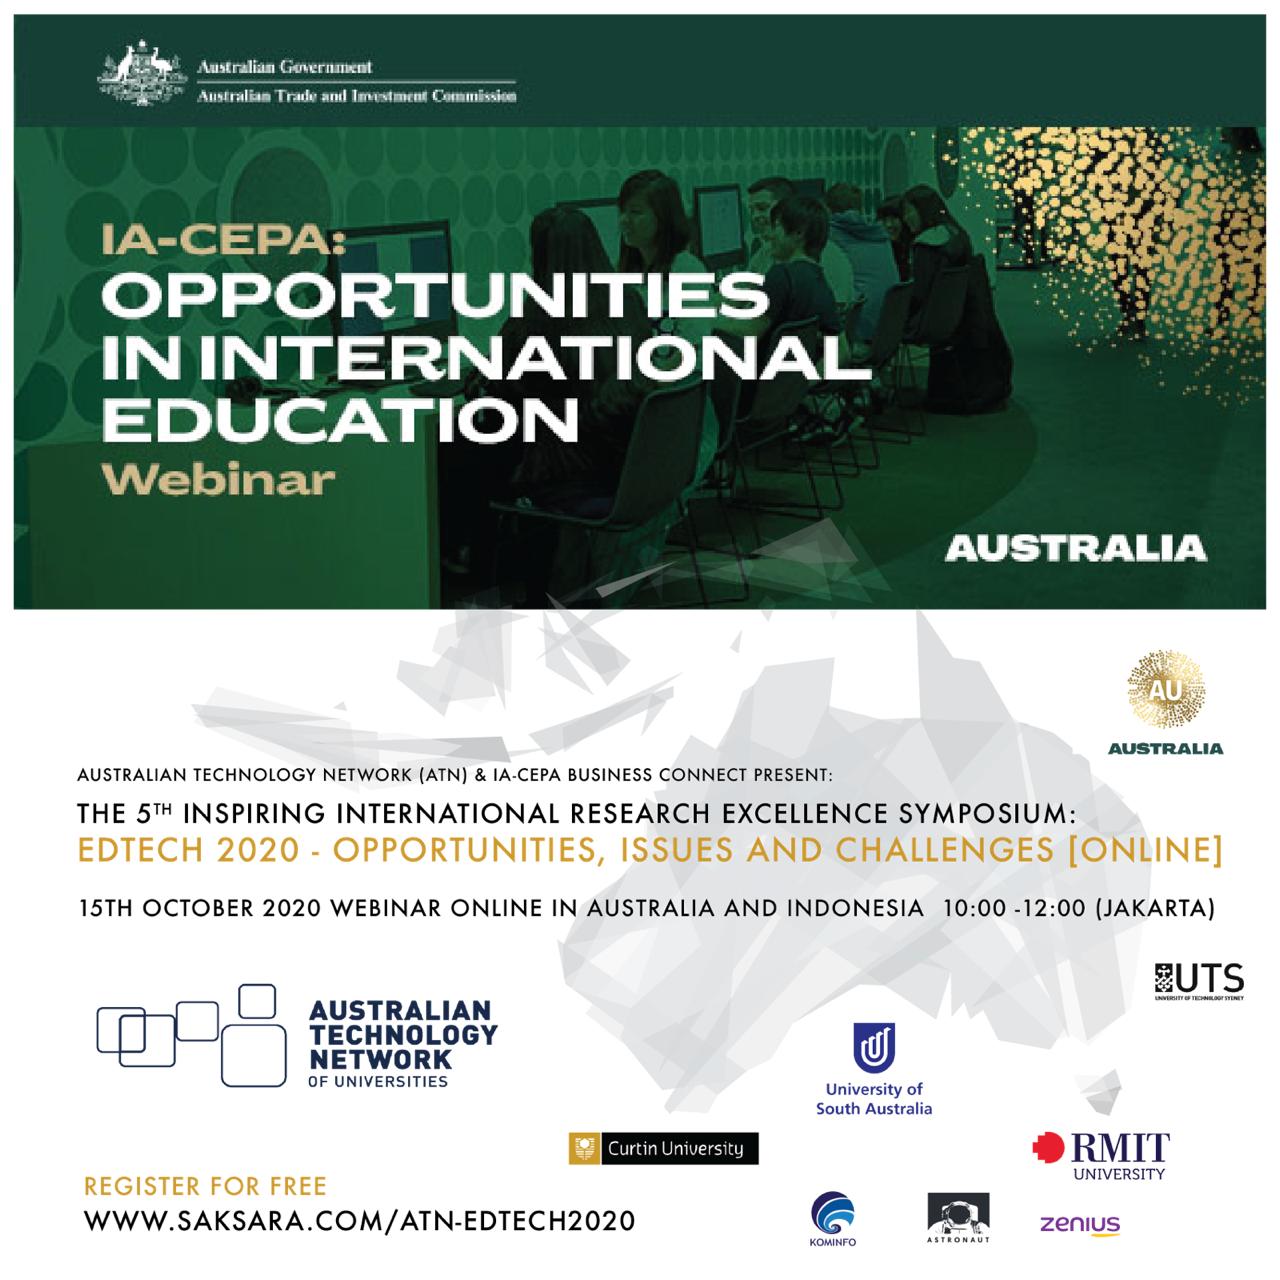 Online Webinar in Australia & Indonesia: EdTech 2020 – Opportunities, Issues and Challenges.